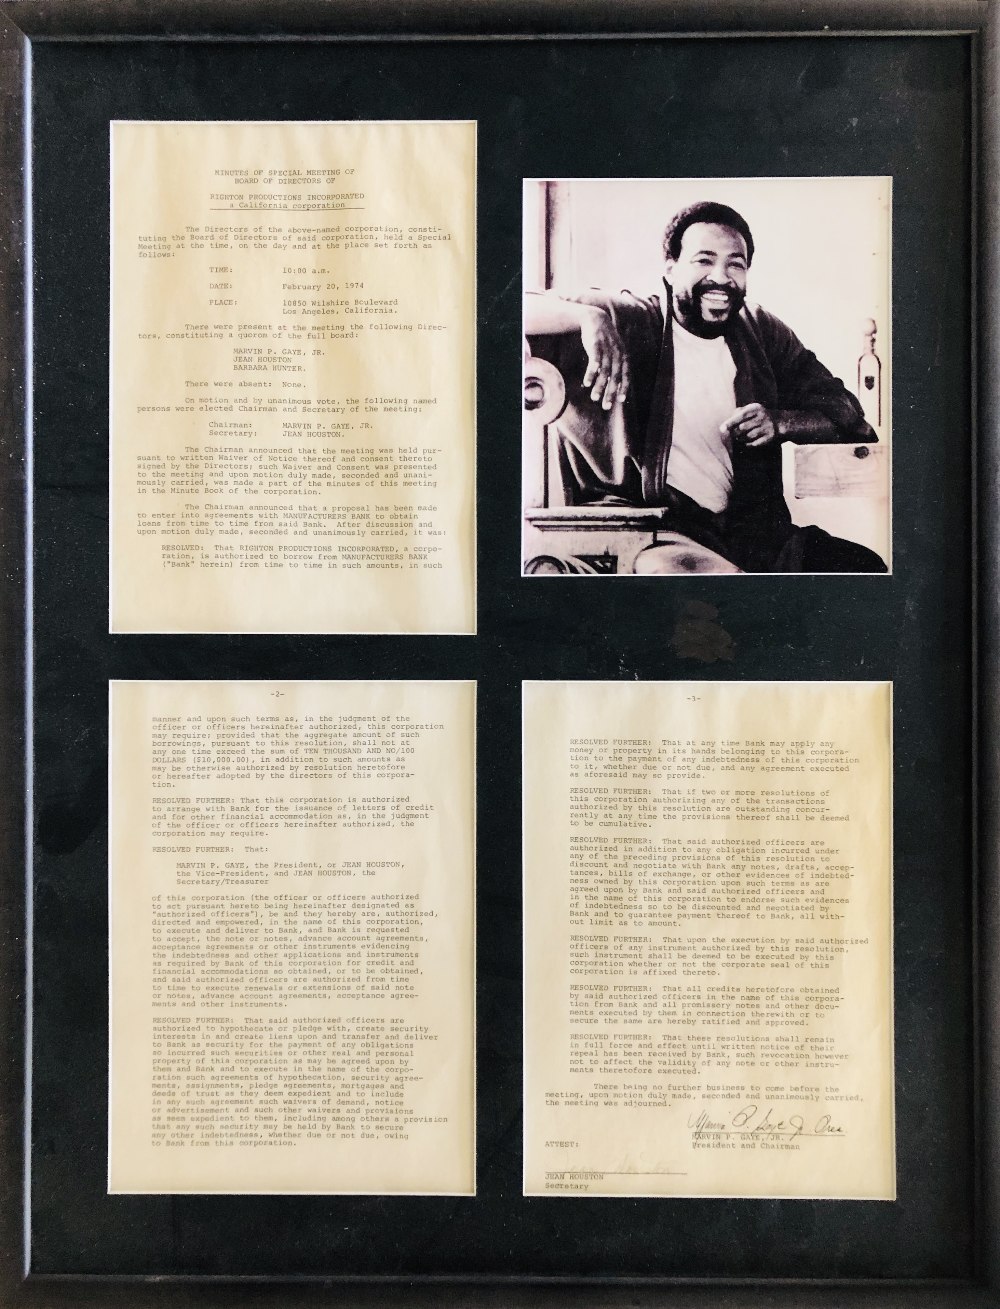 MARVIN GAYE FRAMED SIGNED CONTRACT.